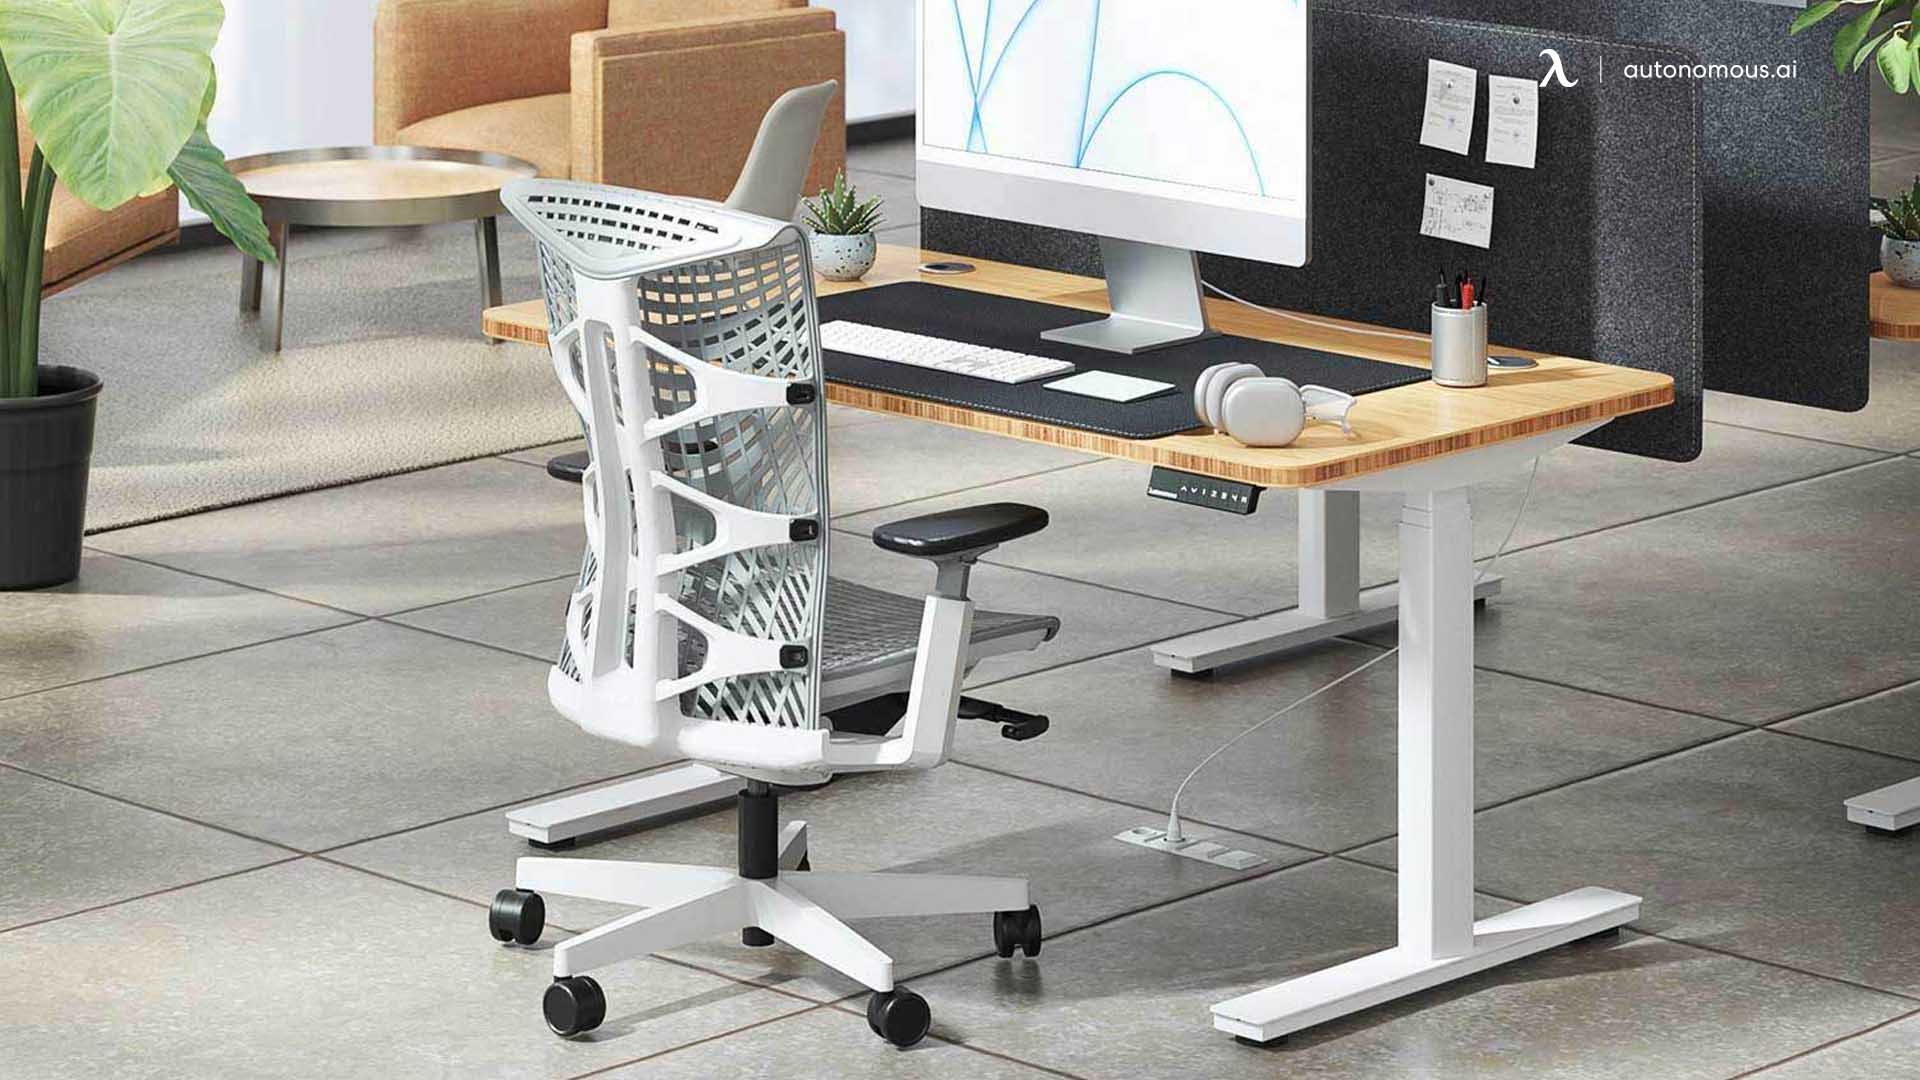 How to Find an Inexpensive Office Chair But Still Comfortable?